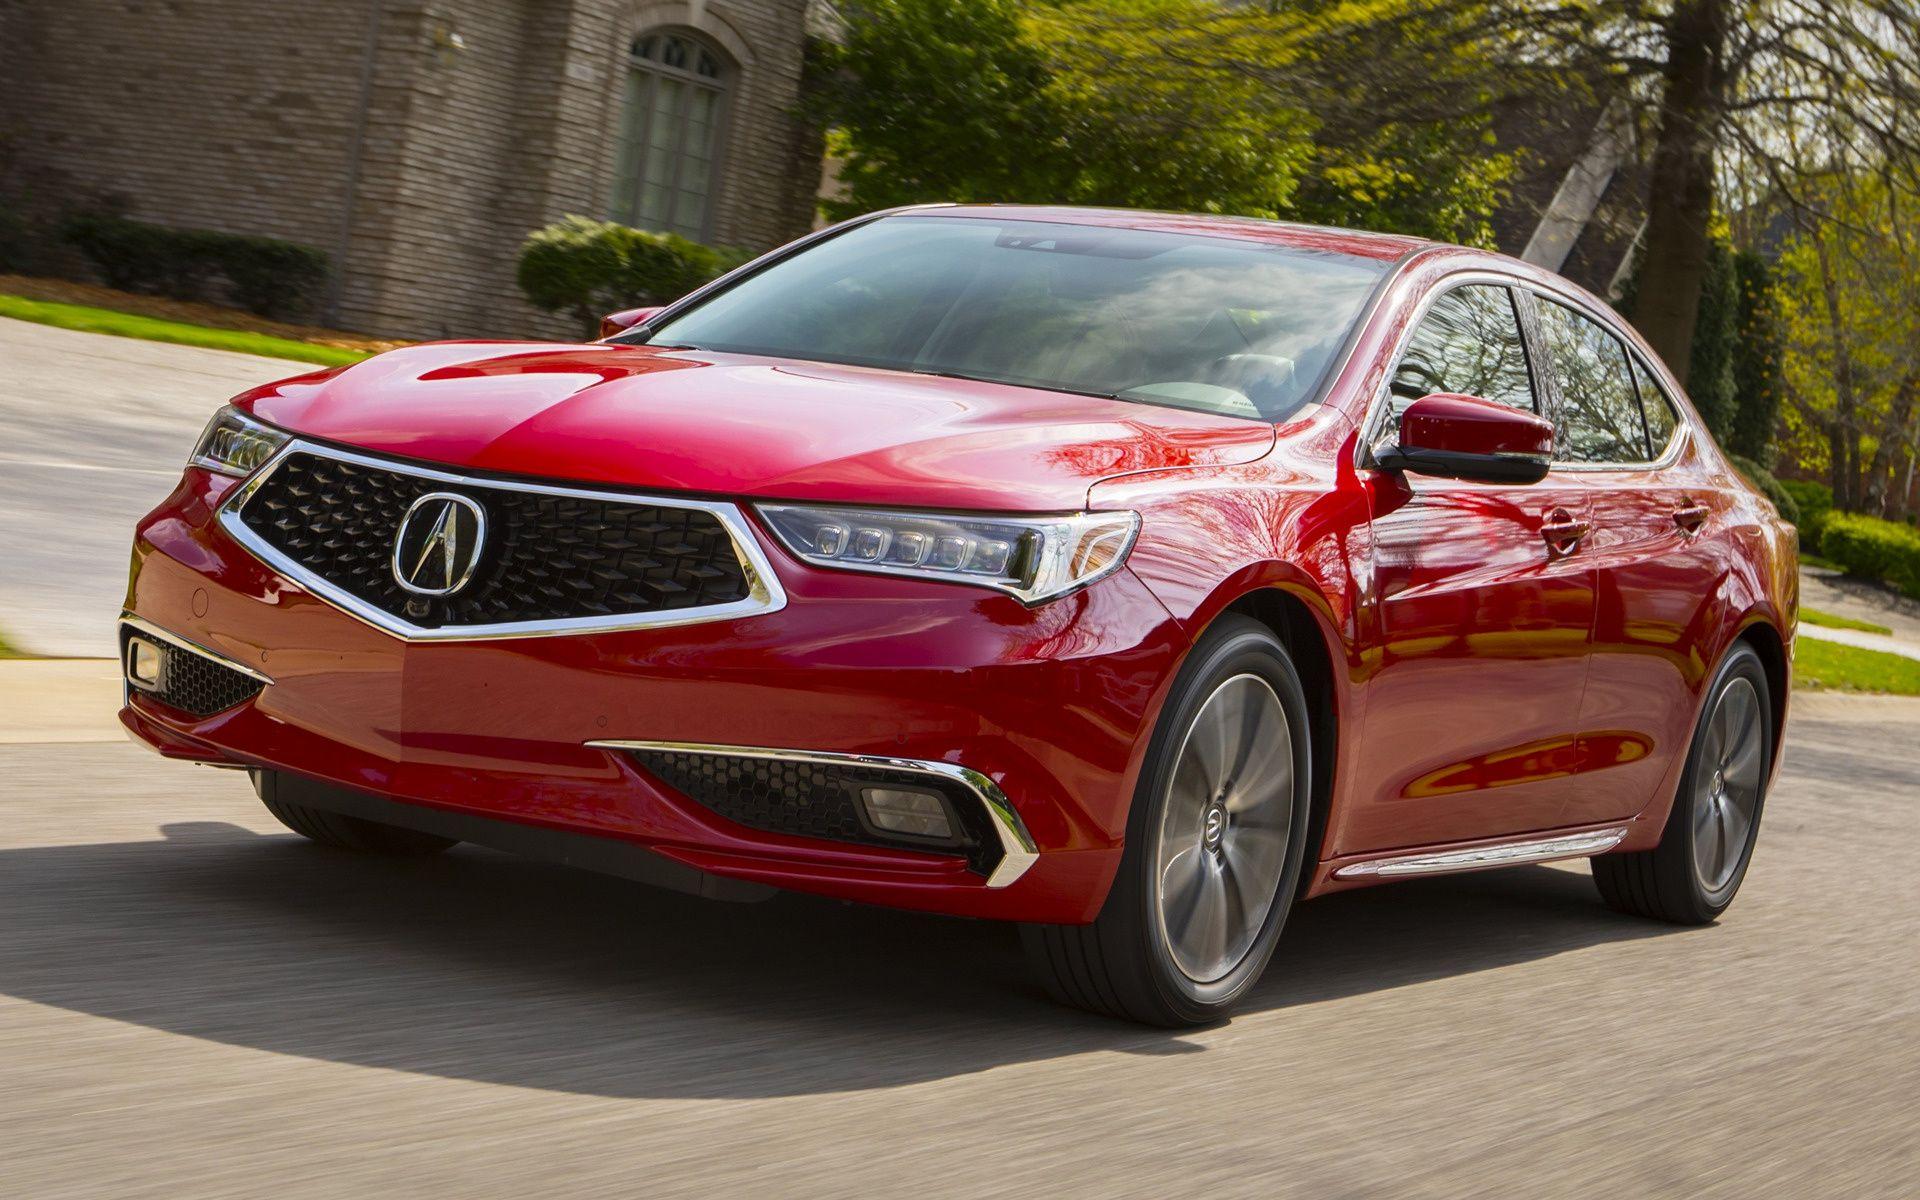 Acura TLX (2018) Wallpaper and HD Image